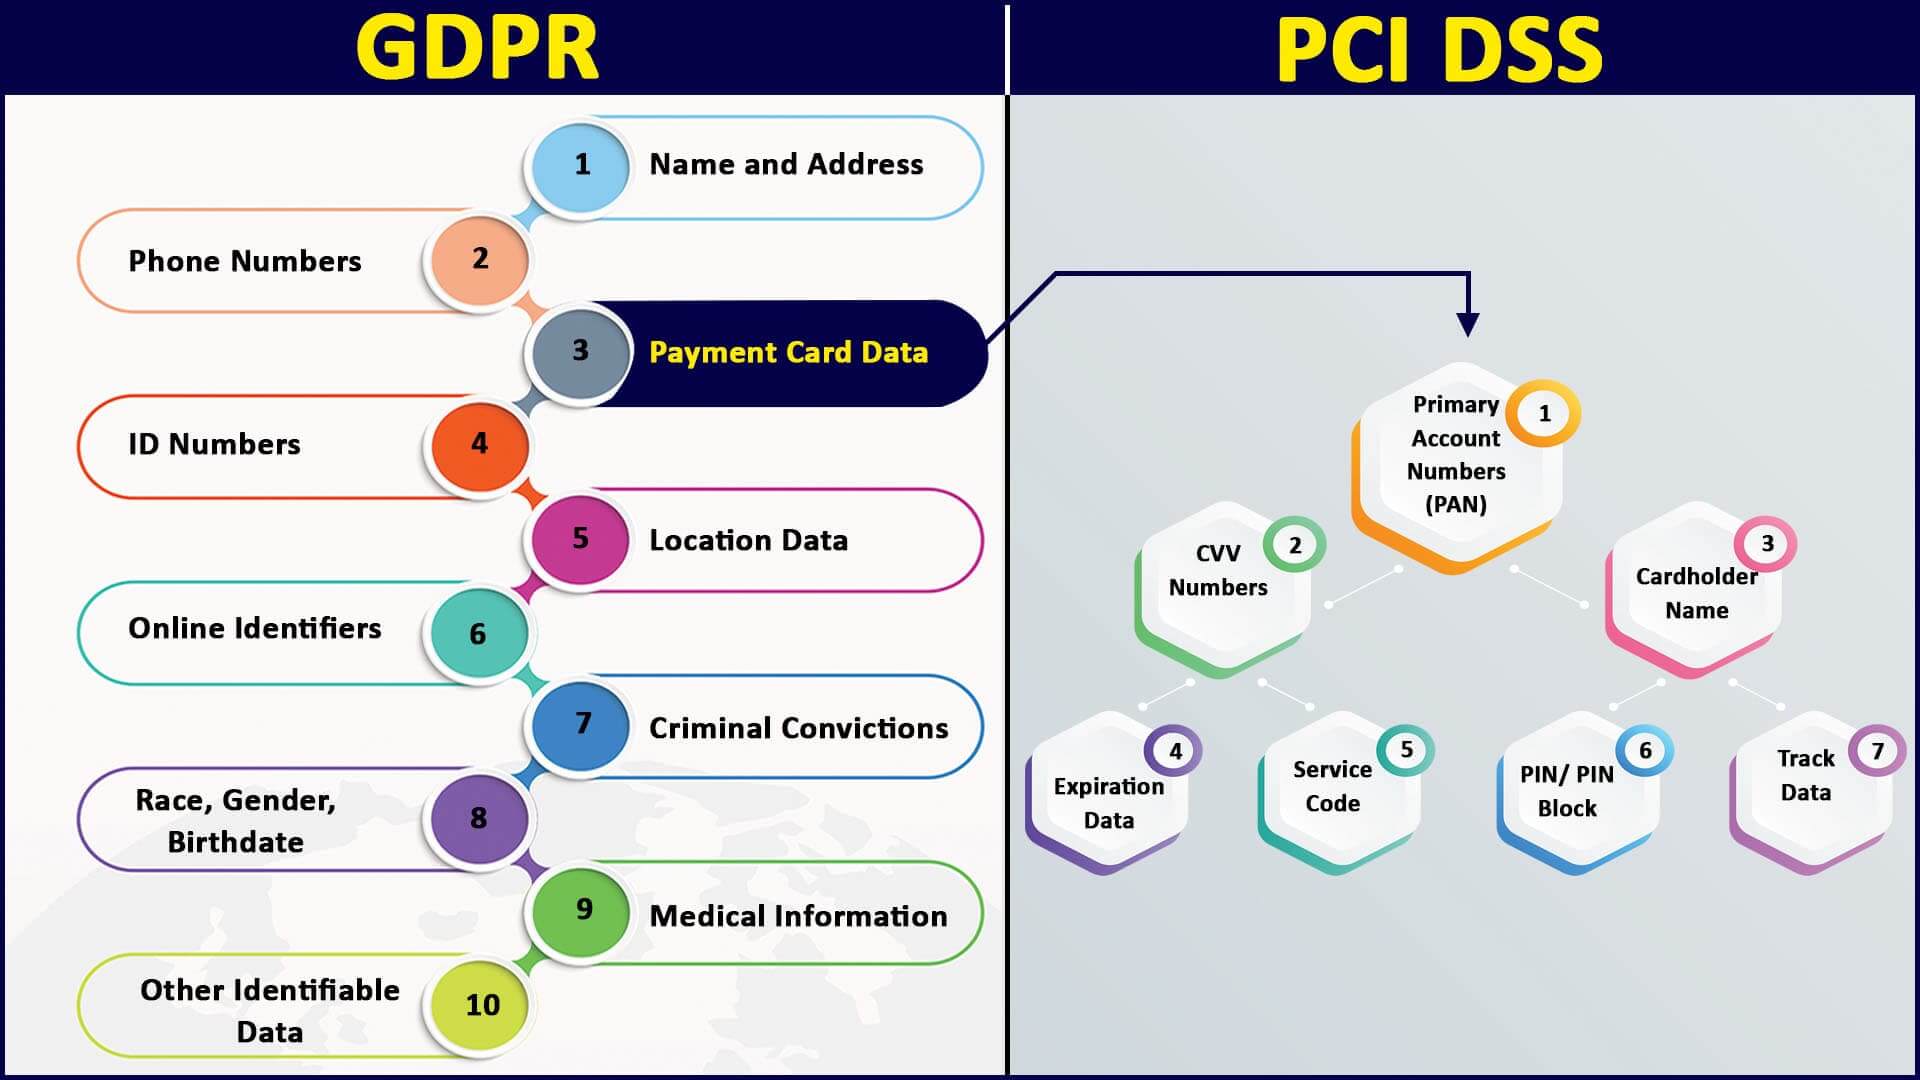 Scope GDPR and PCI DSS